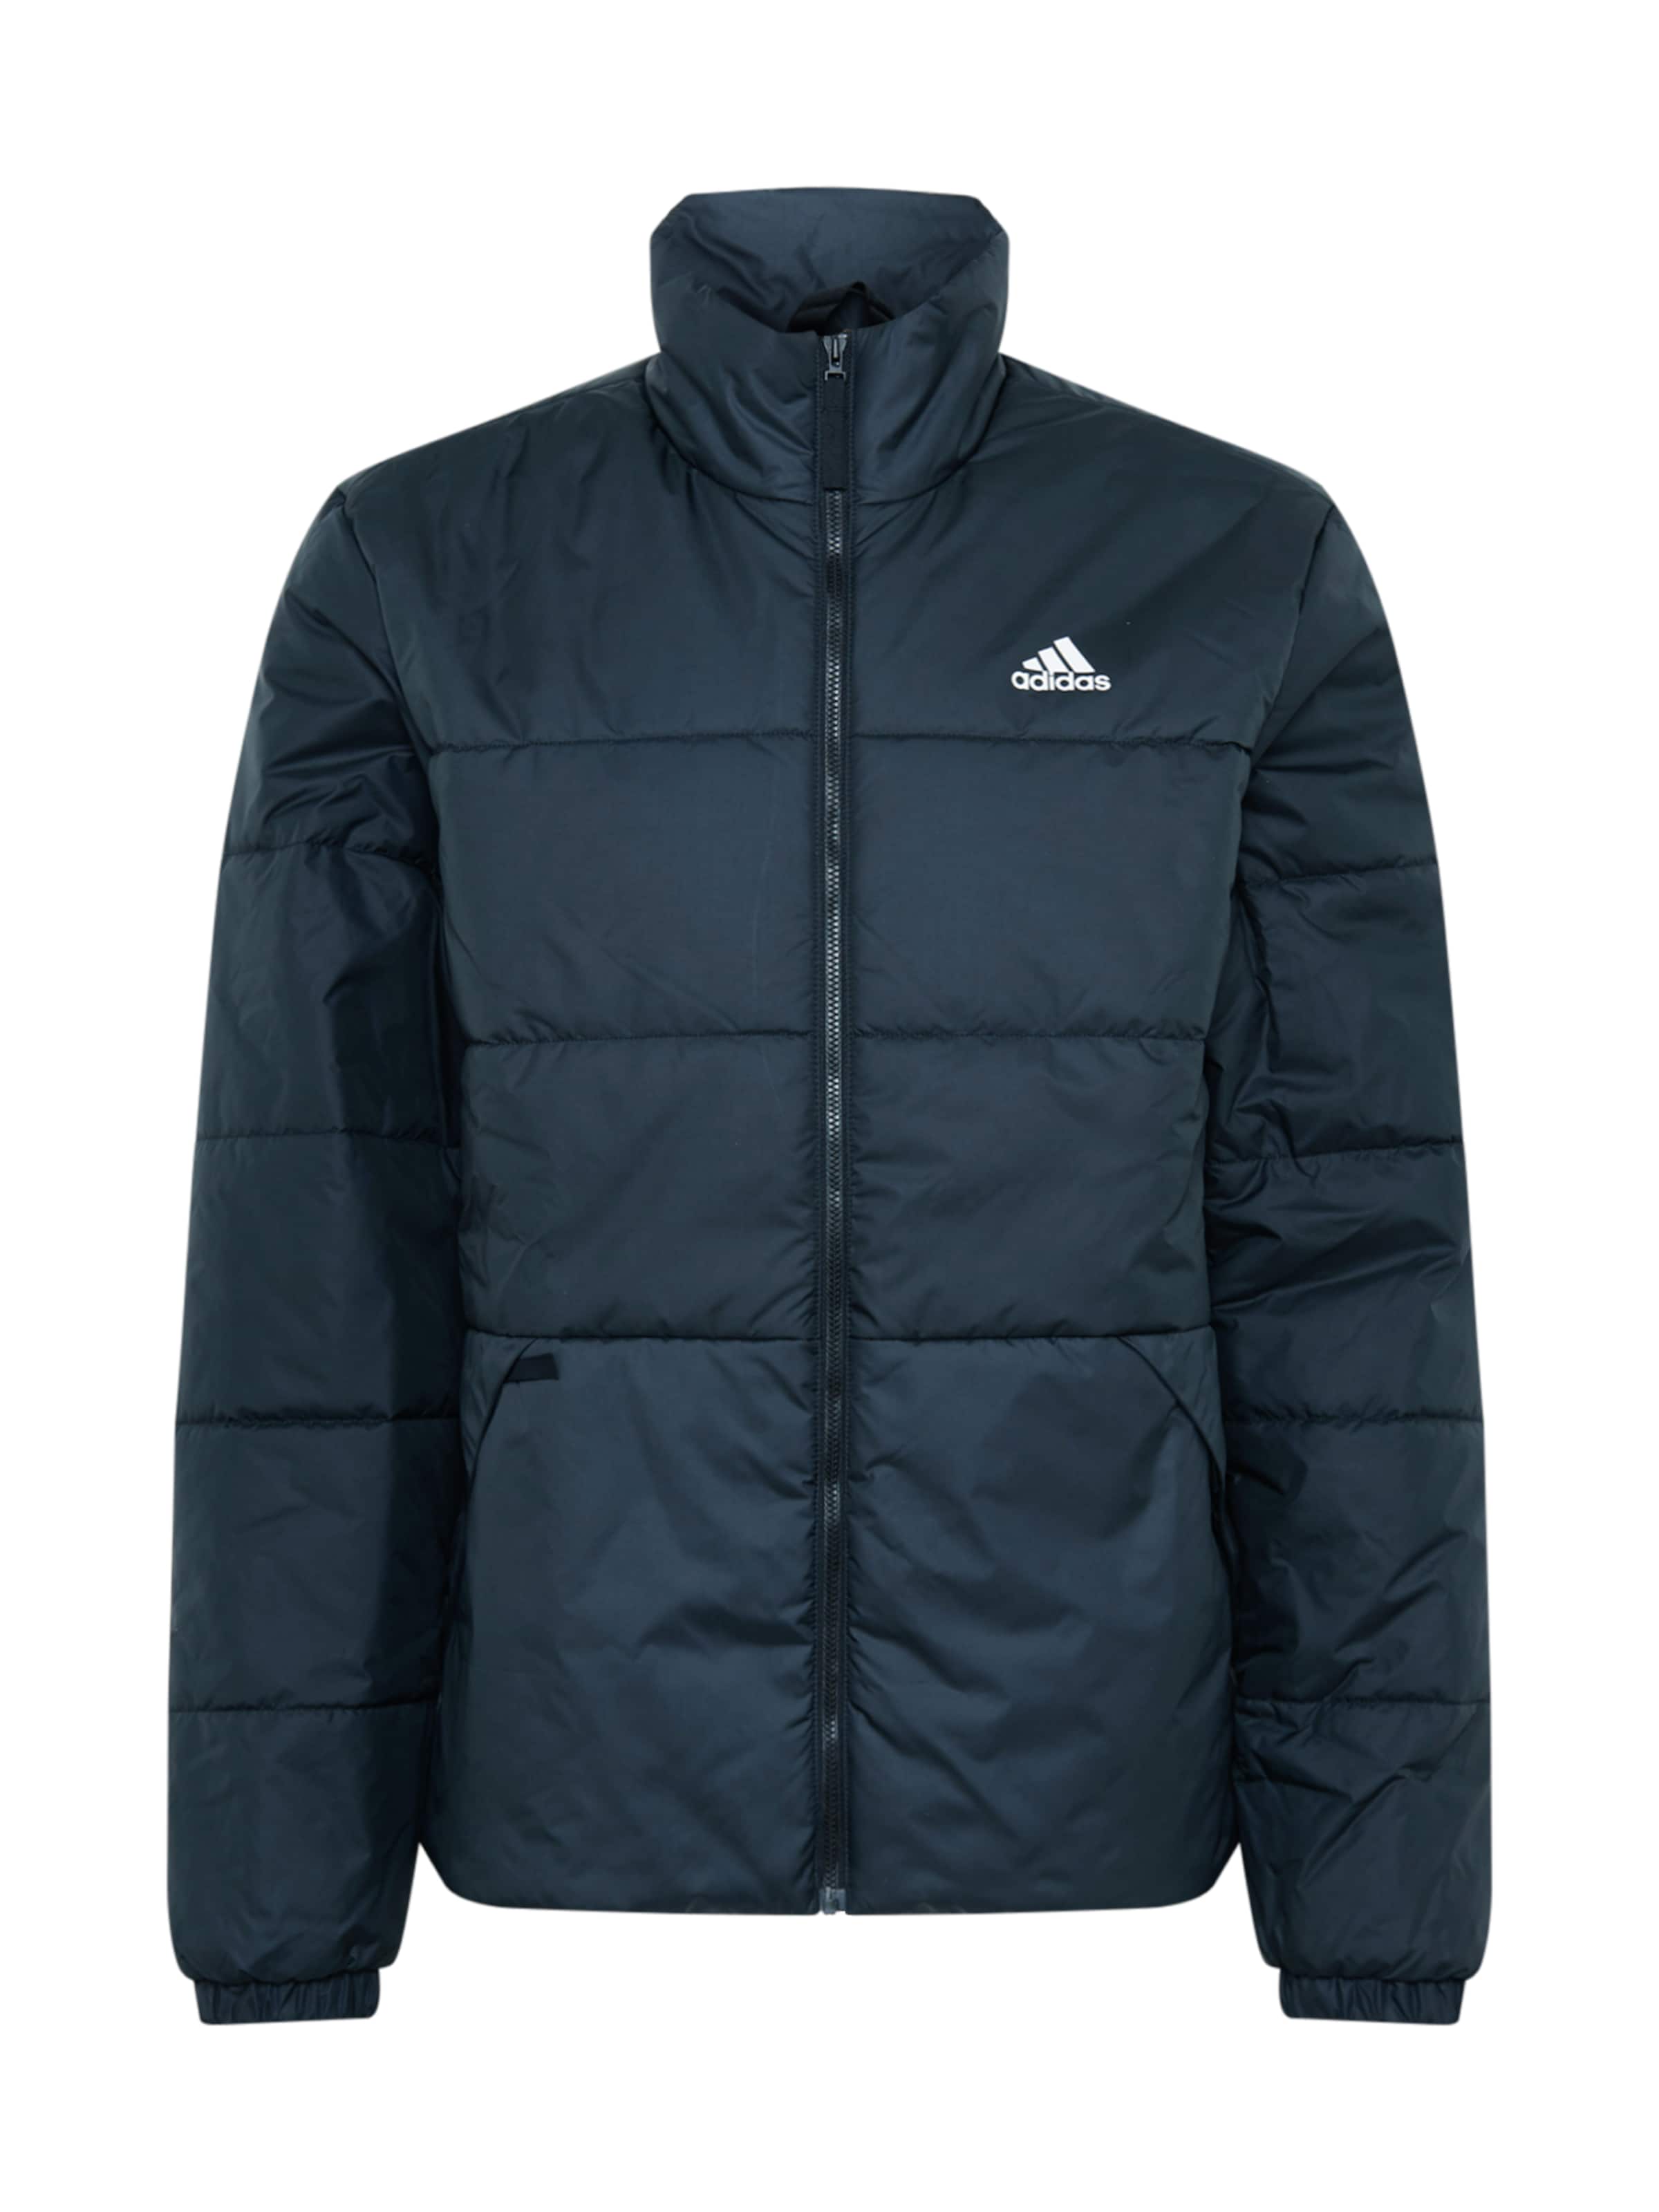 ADIDAS PERFORMANCE Outdoor jacket in 